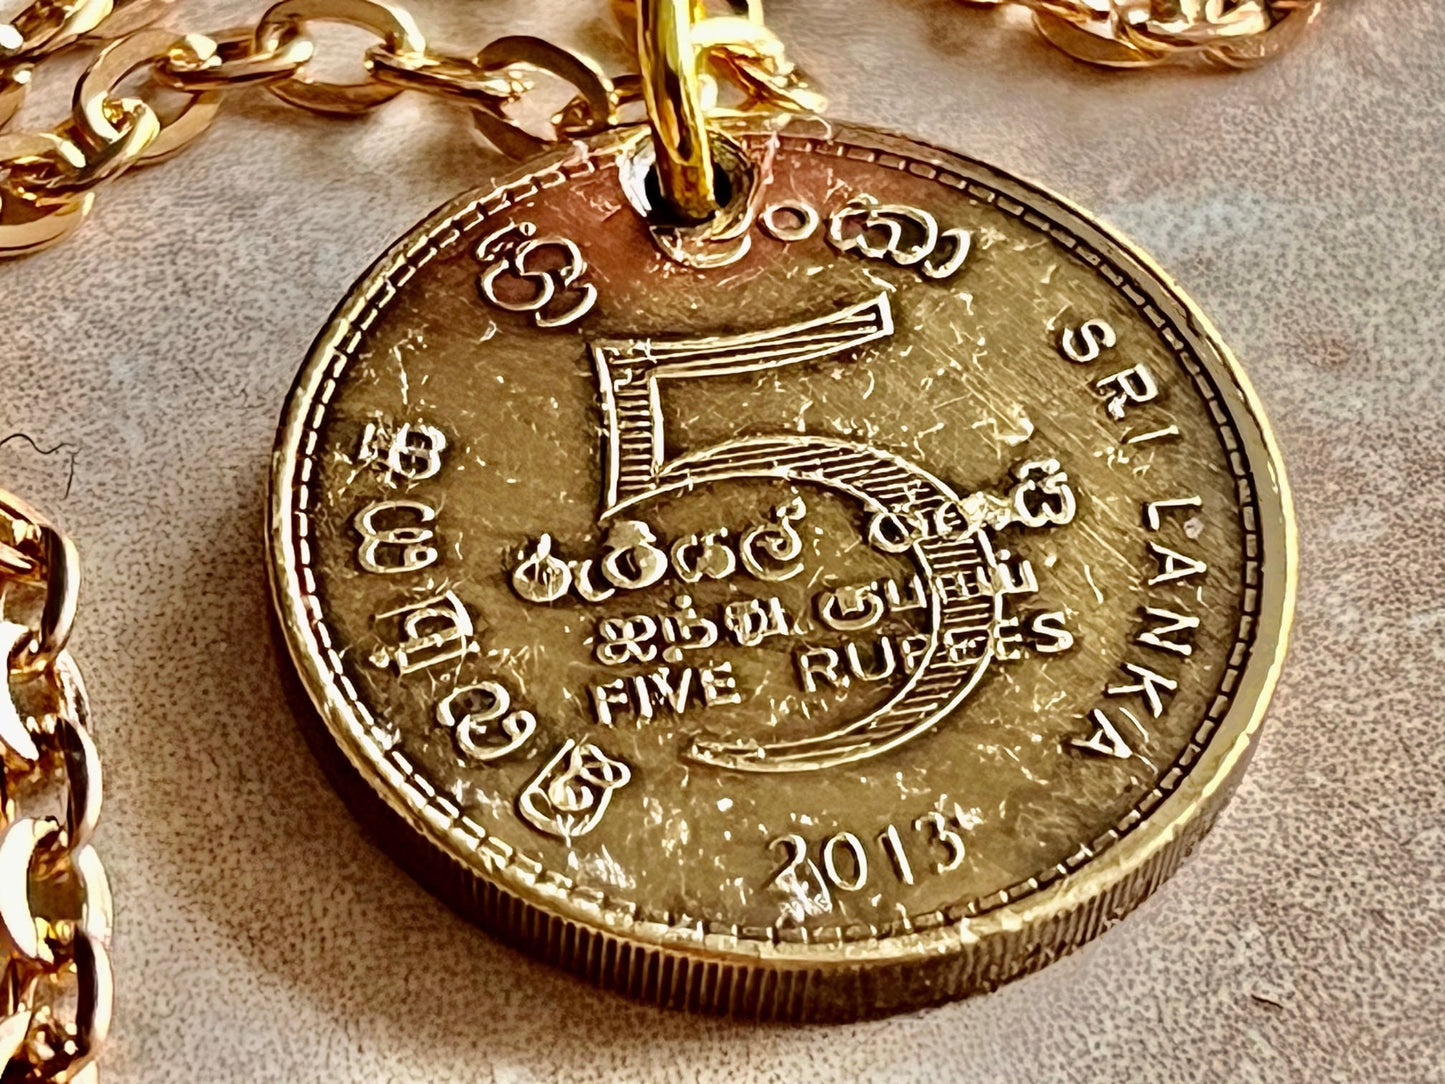 Sri Lanka Coin Necklace 5 Rupees Pendant Handmade Custom Made Charm Gift For Friend Coin Charm Gift For Him, Coin Collector, World Coins